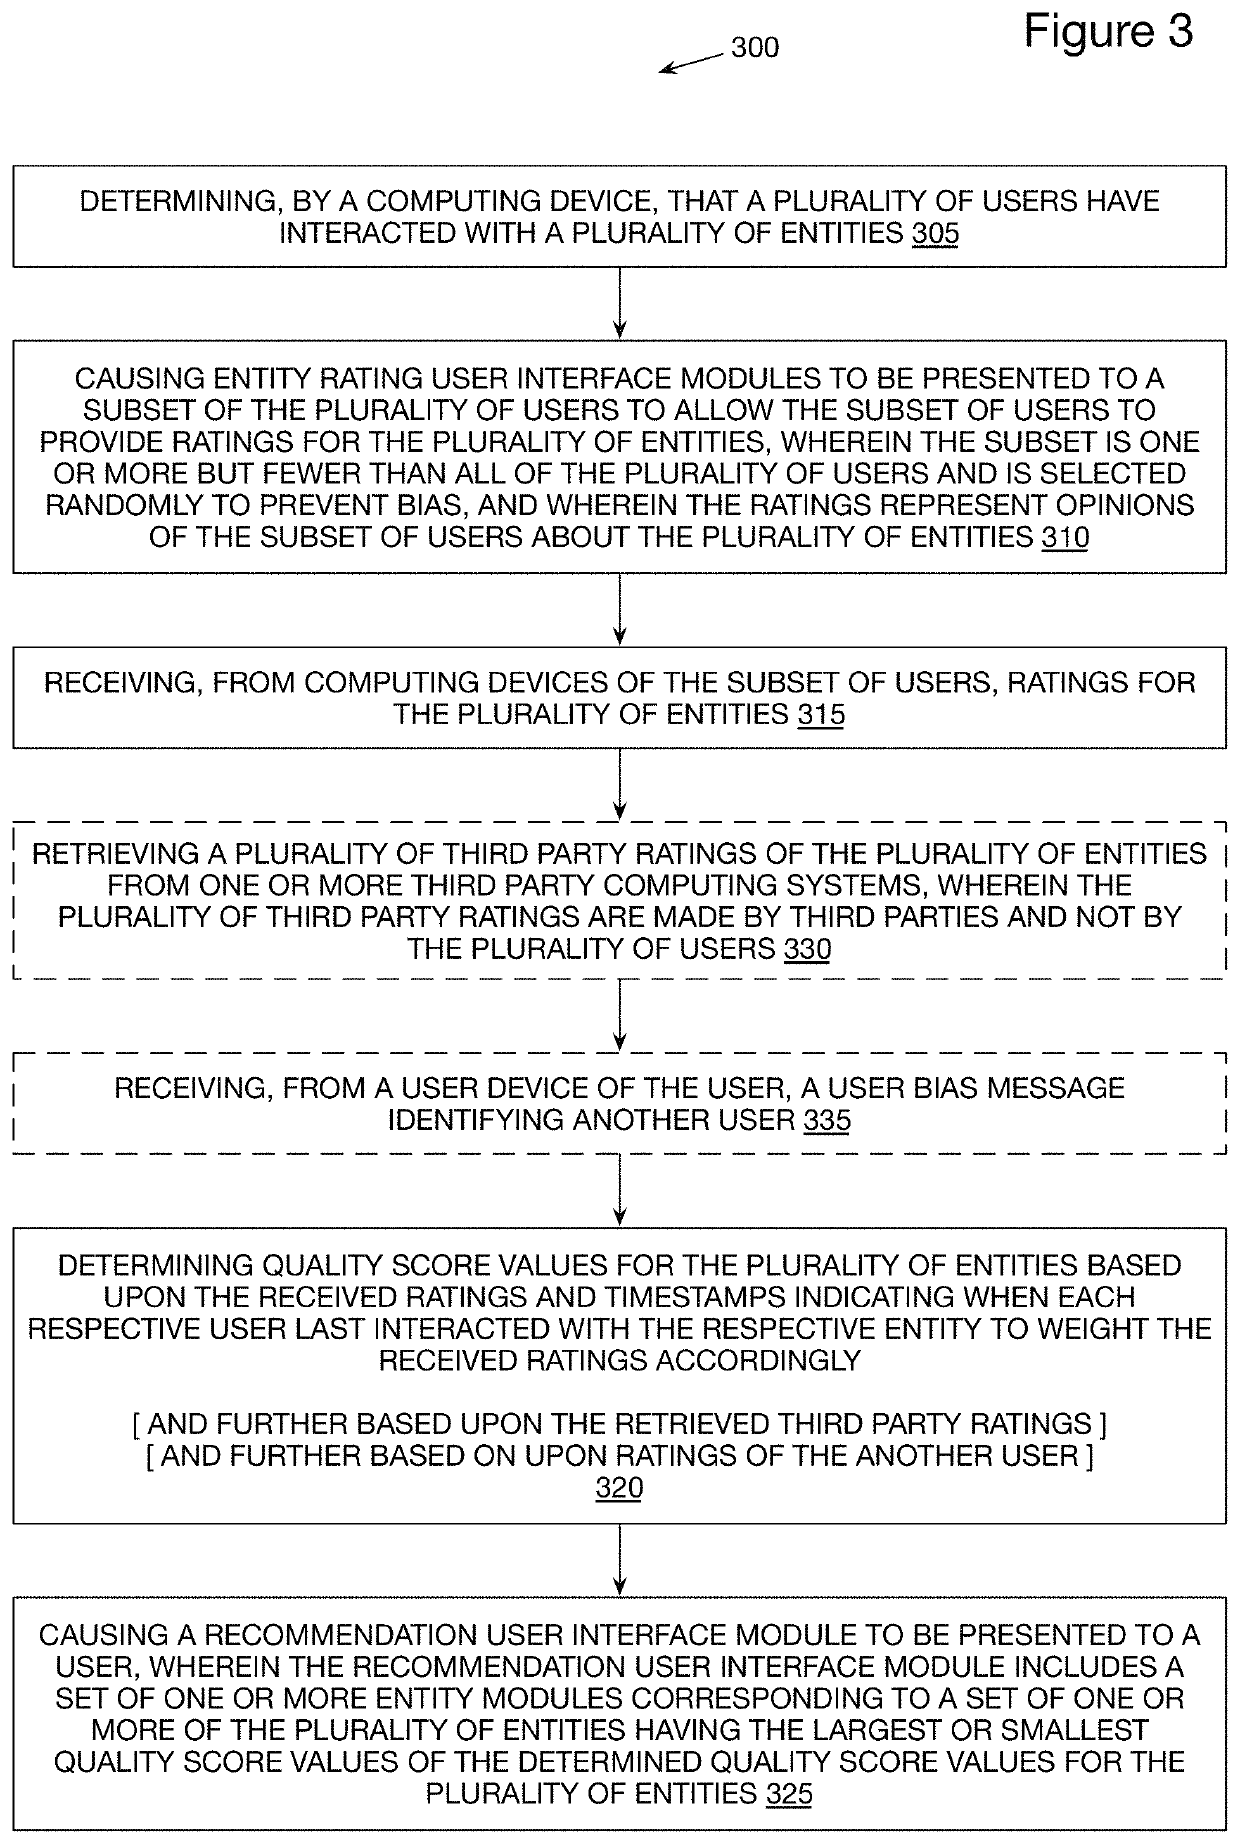 Systems and methods for providing non-manipulable trusted recommendations